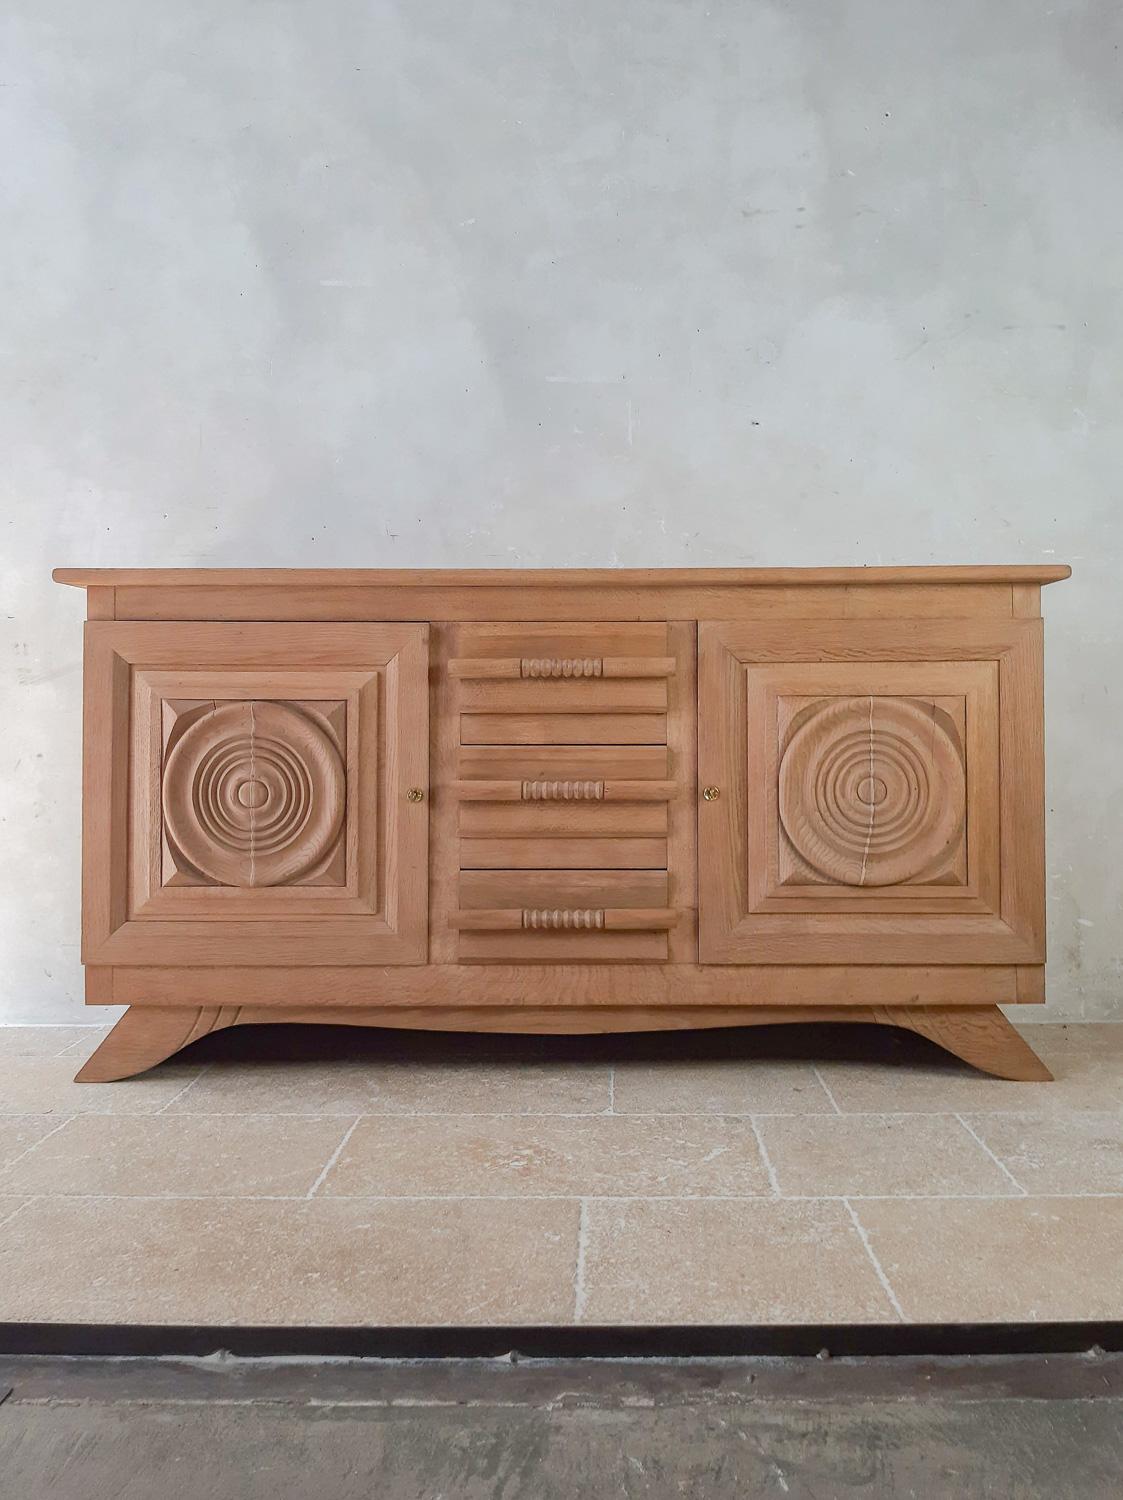 Bleached oak sideboard by Charles Dudouyt from the 1940s, with two round paneled doors and 3 drawers with wooden handles that are incorporated within the design.

Measures: H 99 x W 192 x D 54 cm.

Professionally filled cracks in wood, panels front